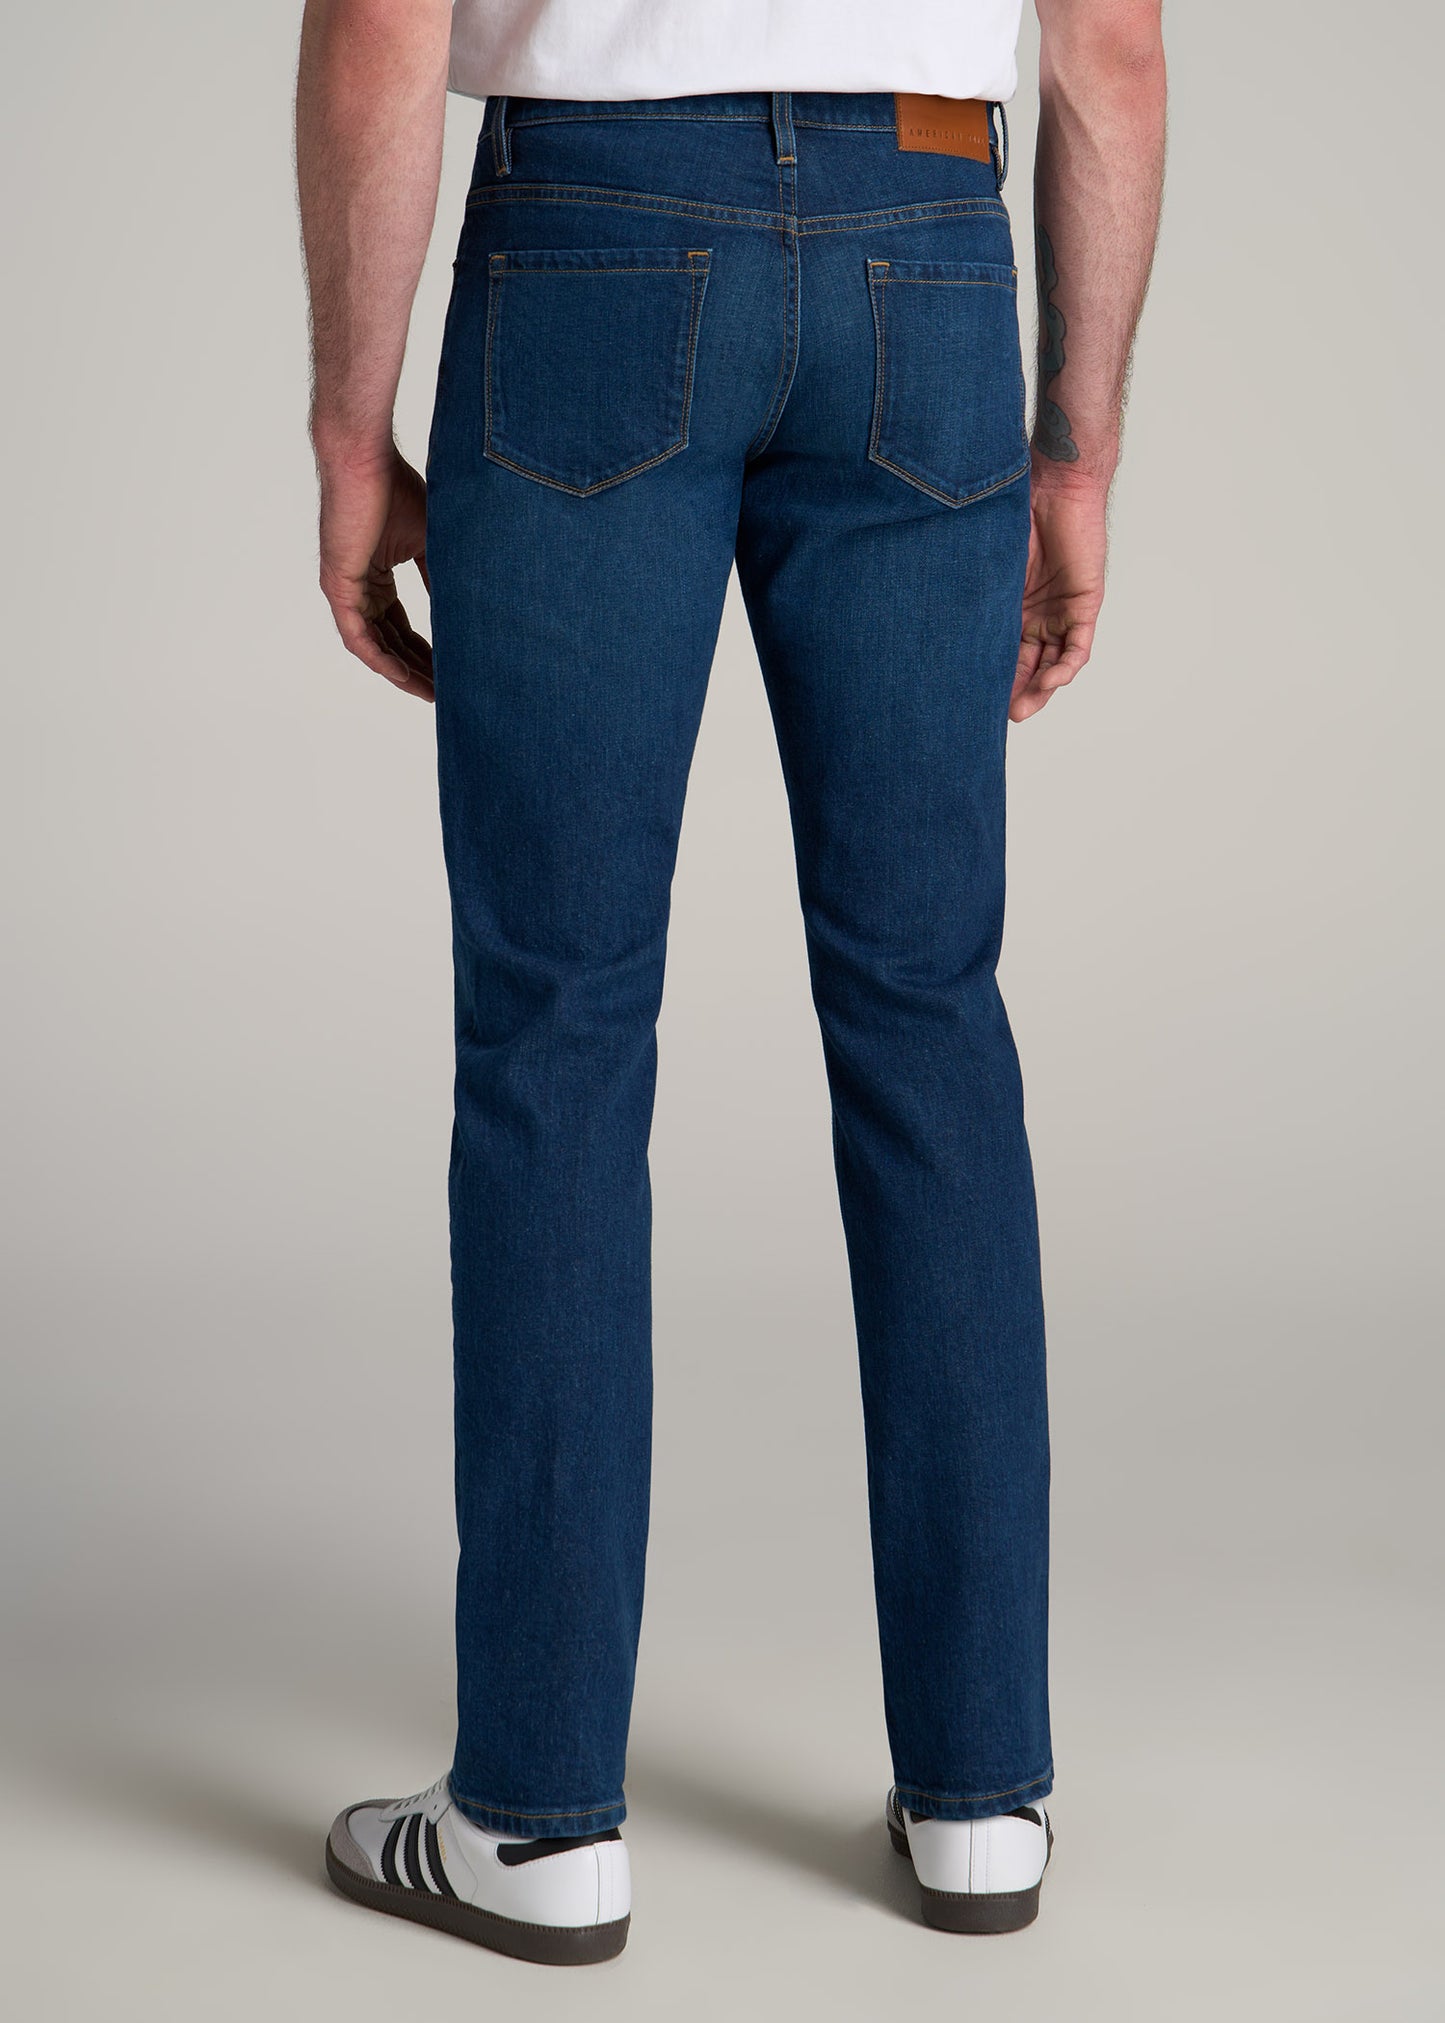 Americana Collection Carman Tapered Fit Jeans For Tall Men in Crown Blue